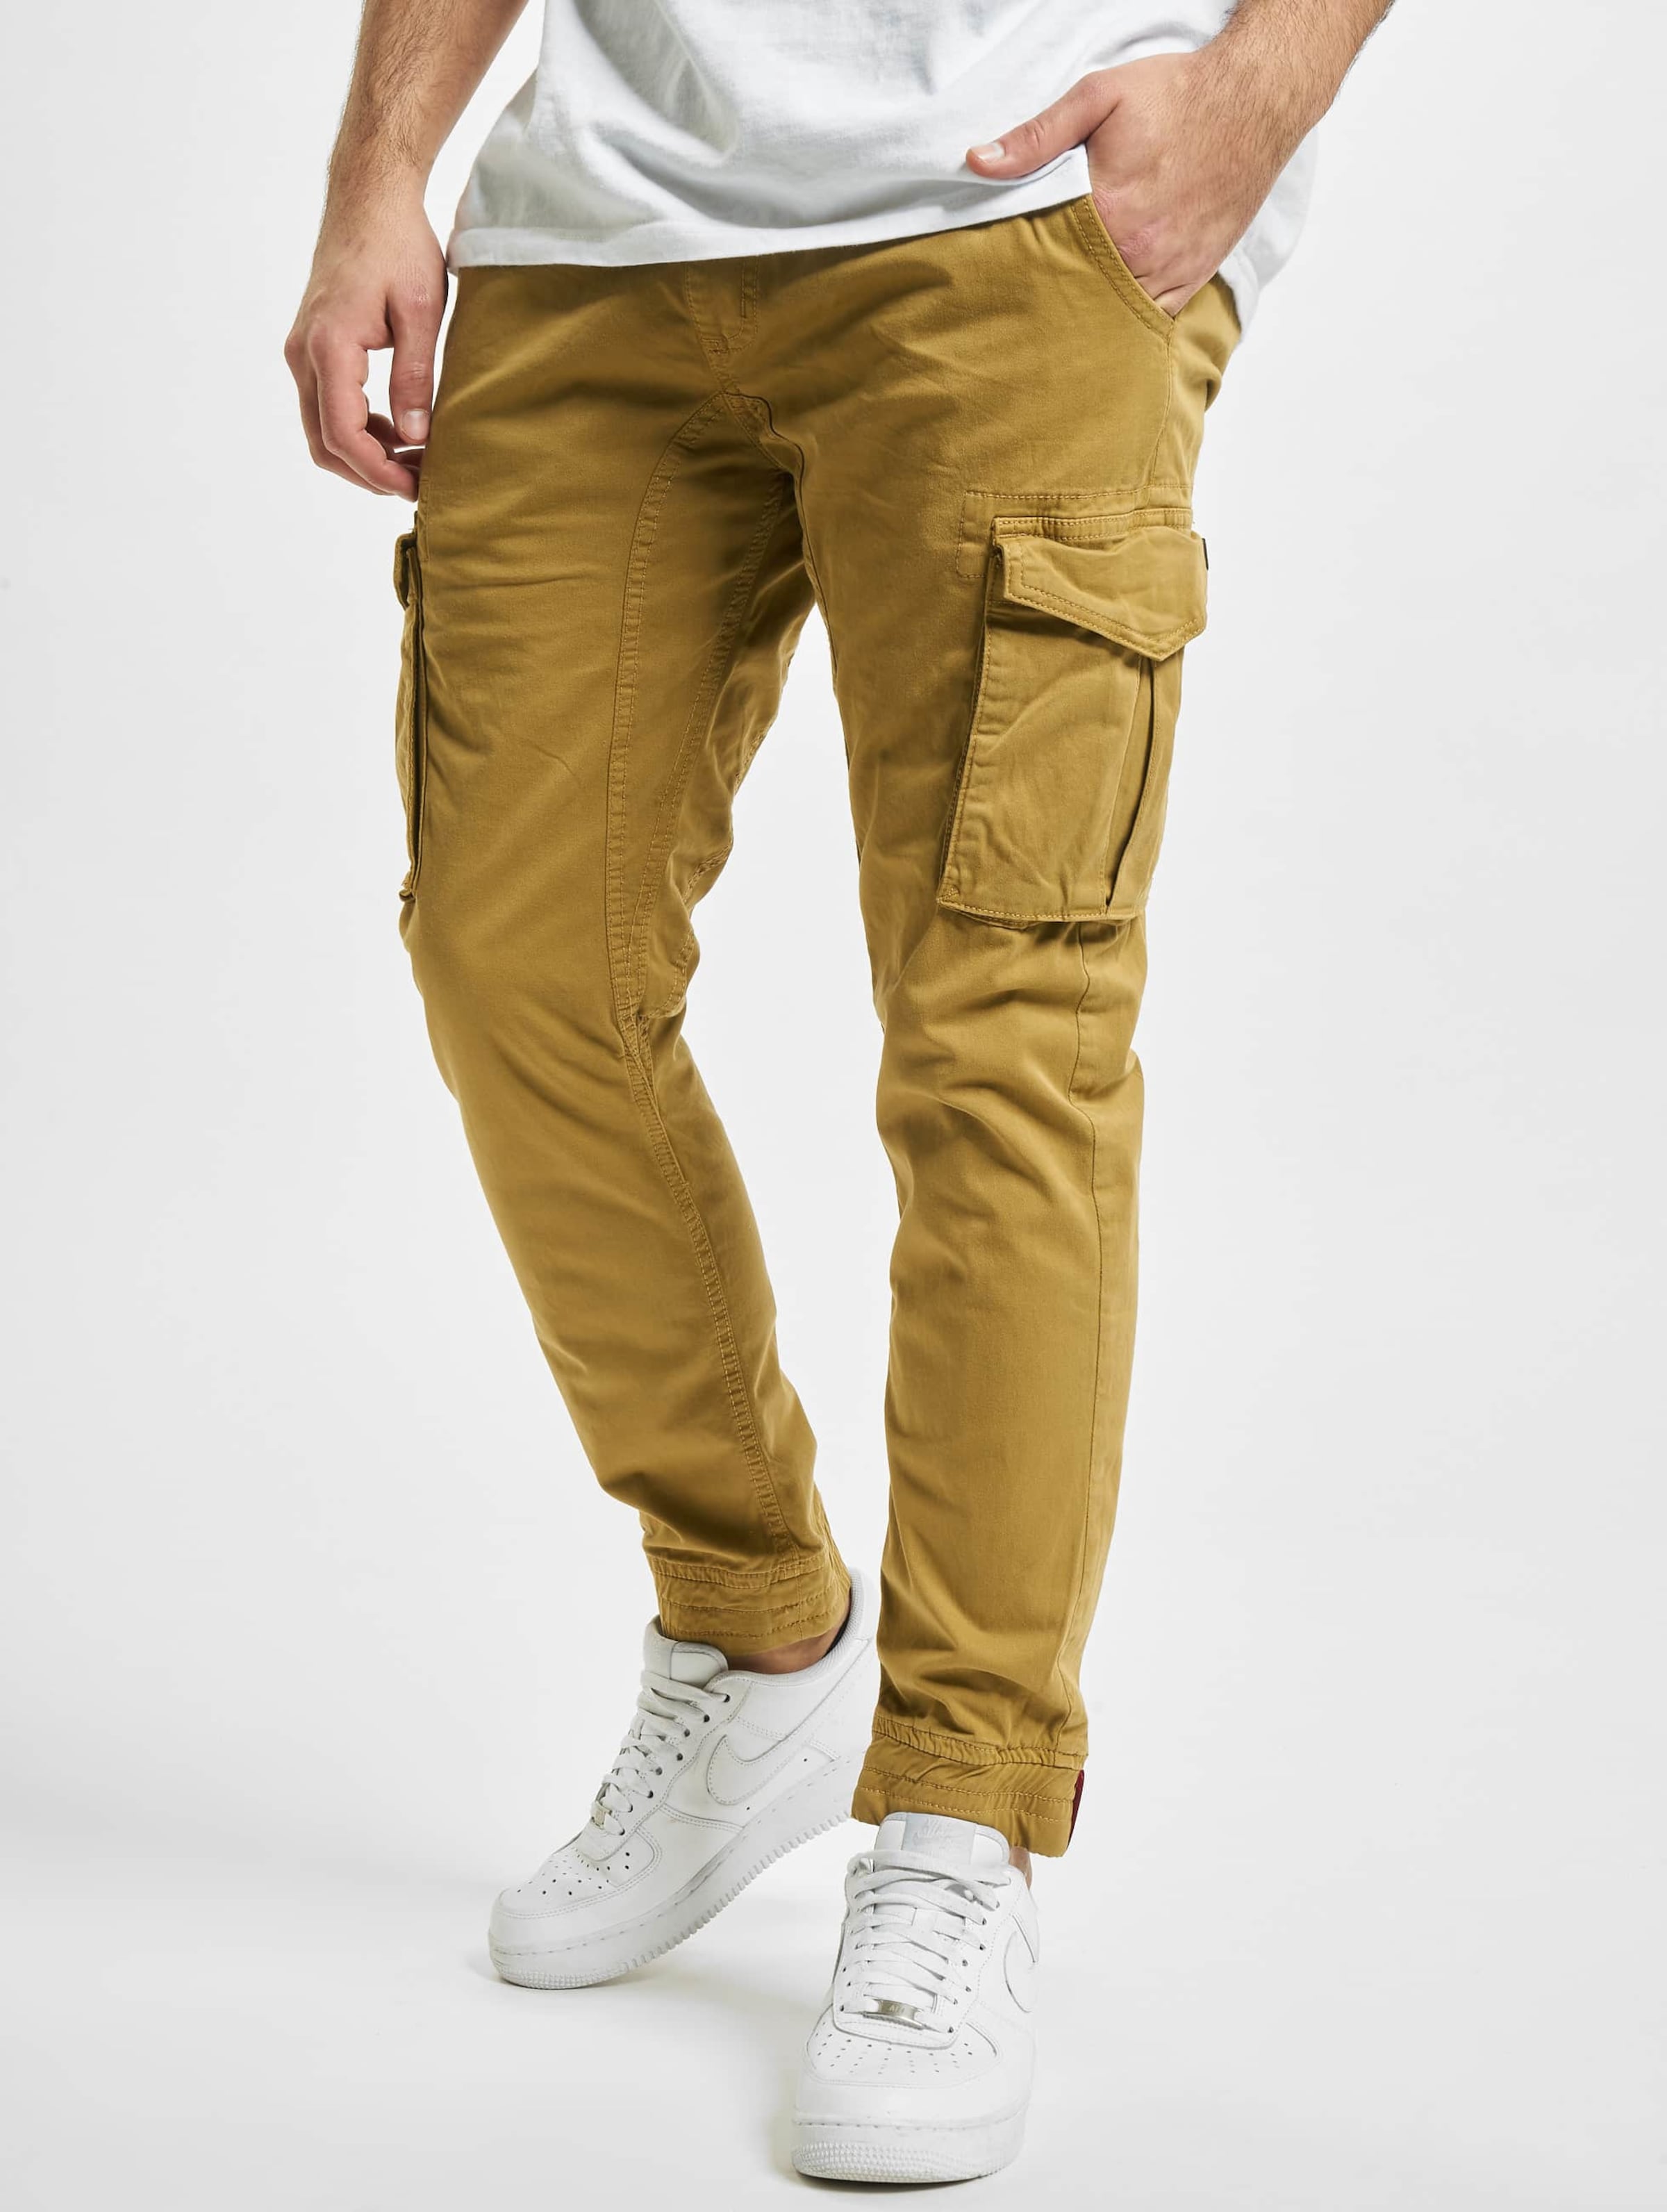 Alpha Industries ACU Straight Leg Utility Pant | Urban Outfitters